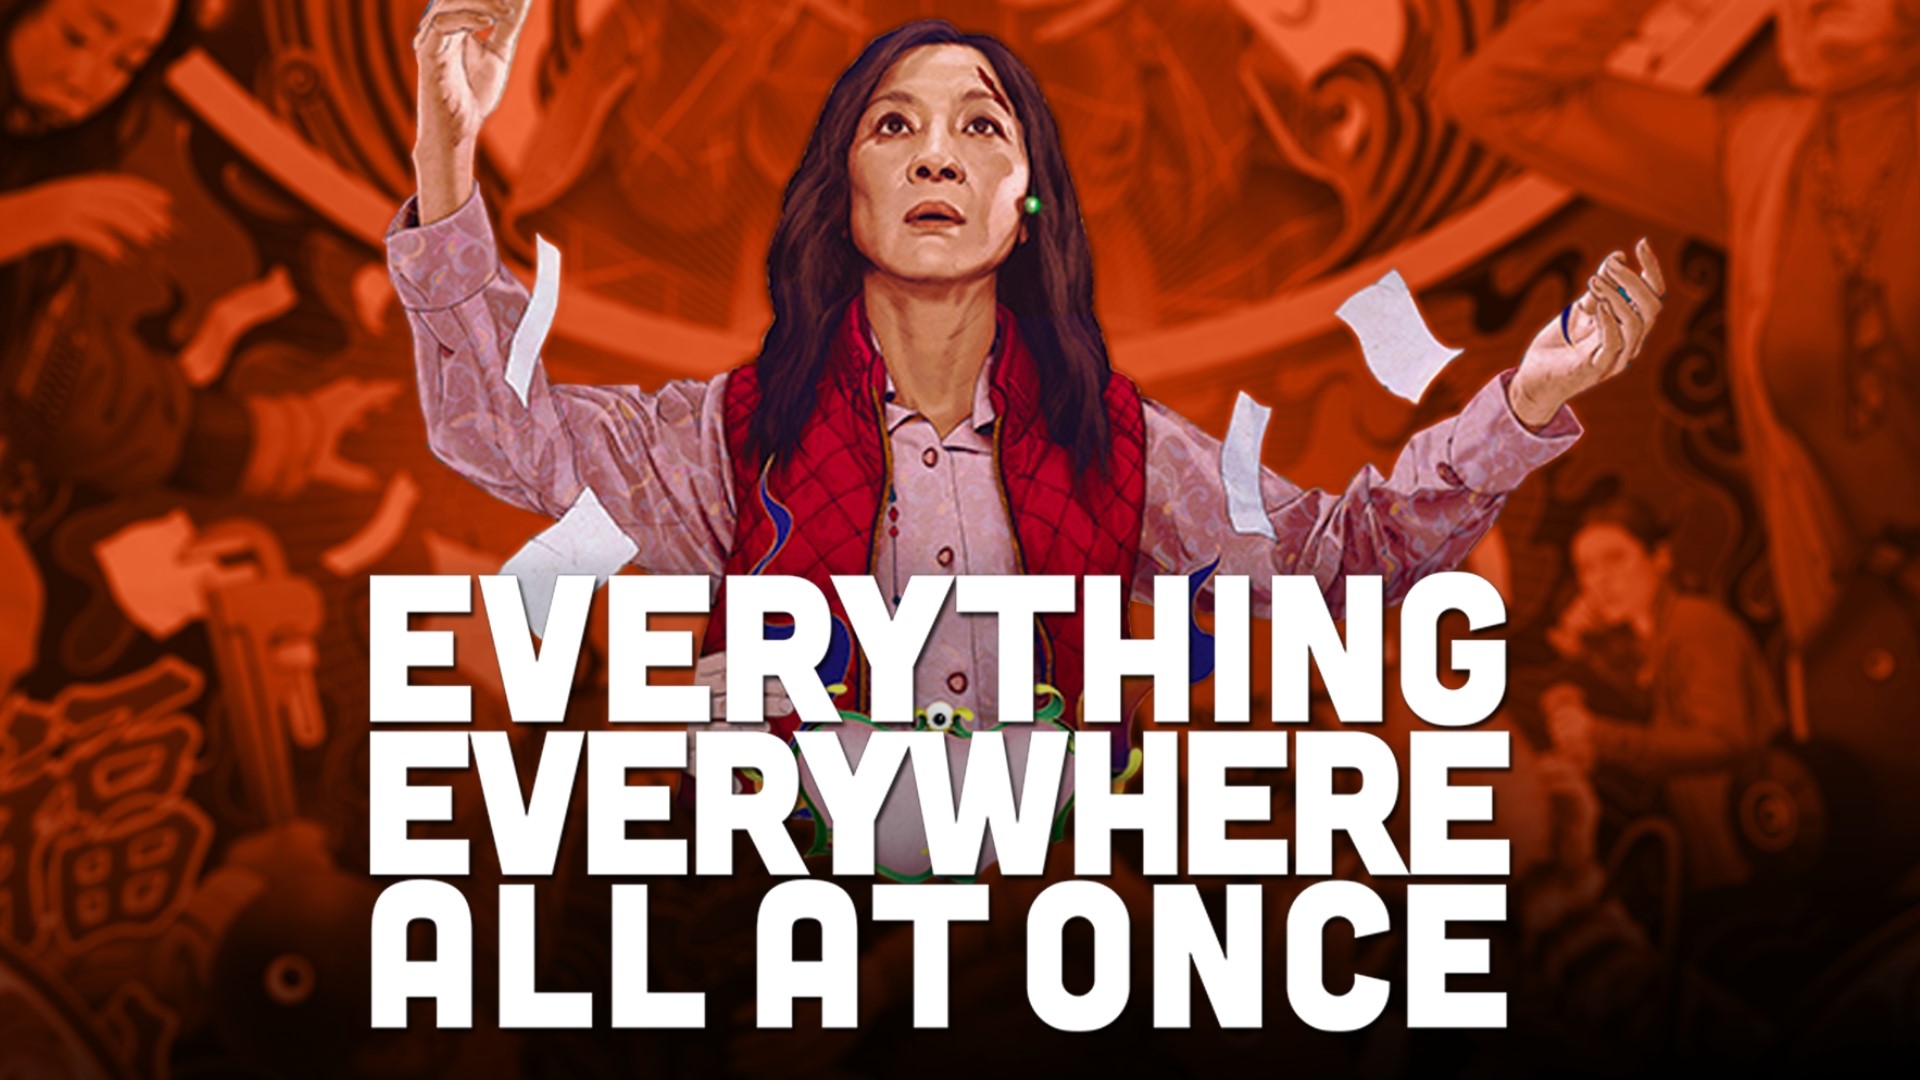 Everything Everywhere All At Once lives up to its name, but it also bring audiences a tender, hyper-realism story about what it means to love each other.